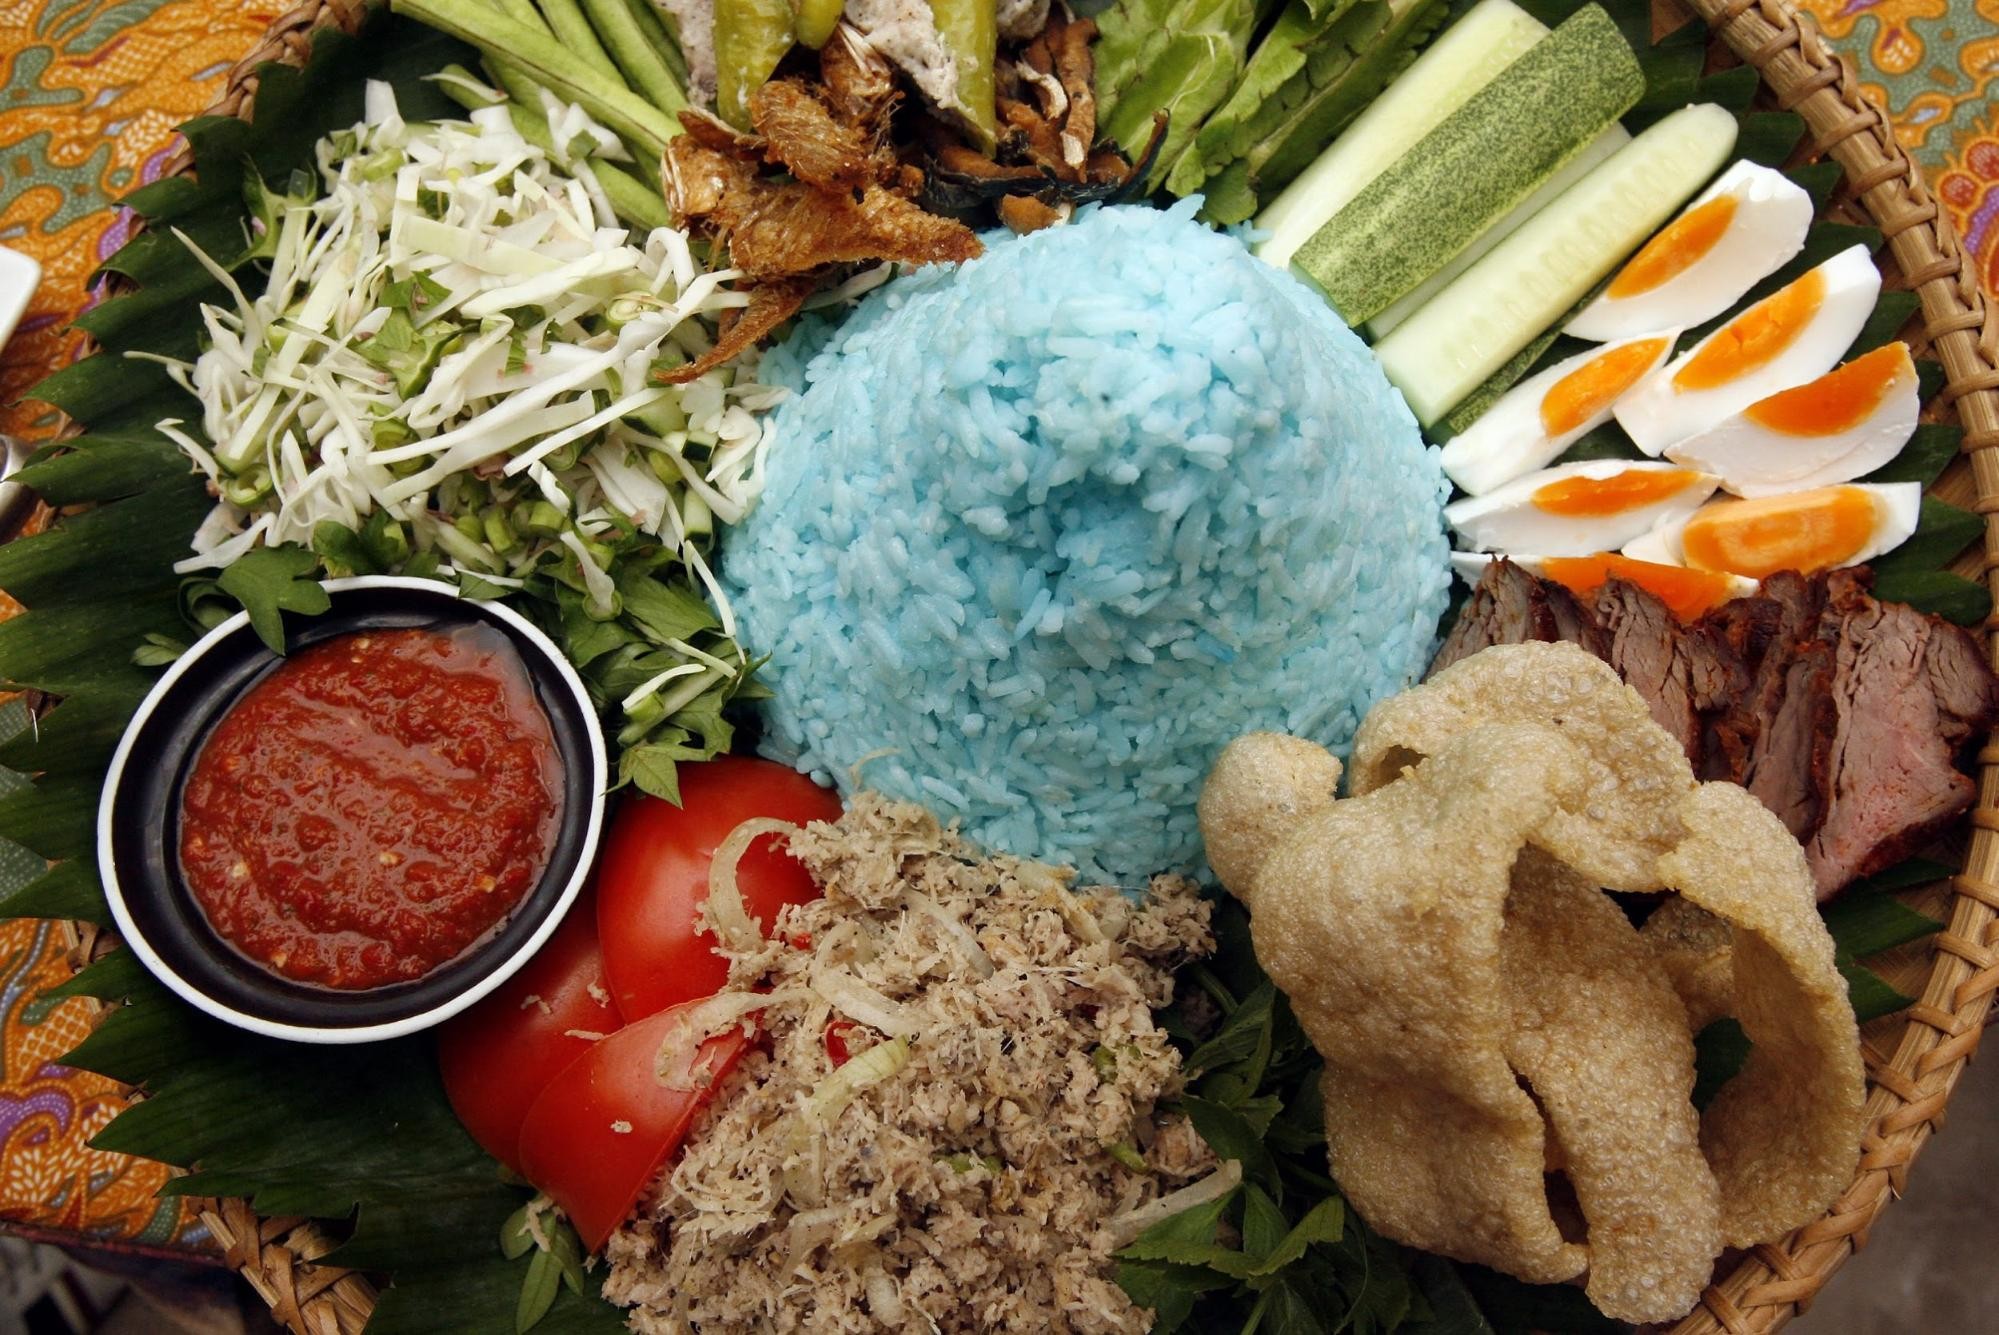 55 Delicious Malaysian Food With A Taste That's Truly Asia